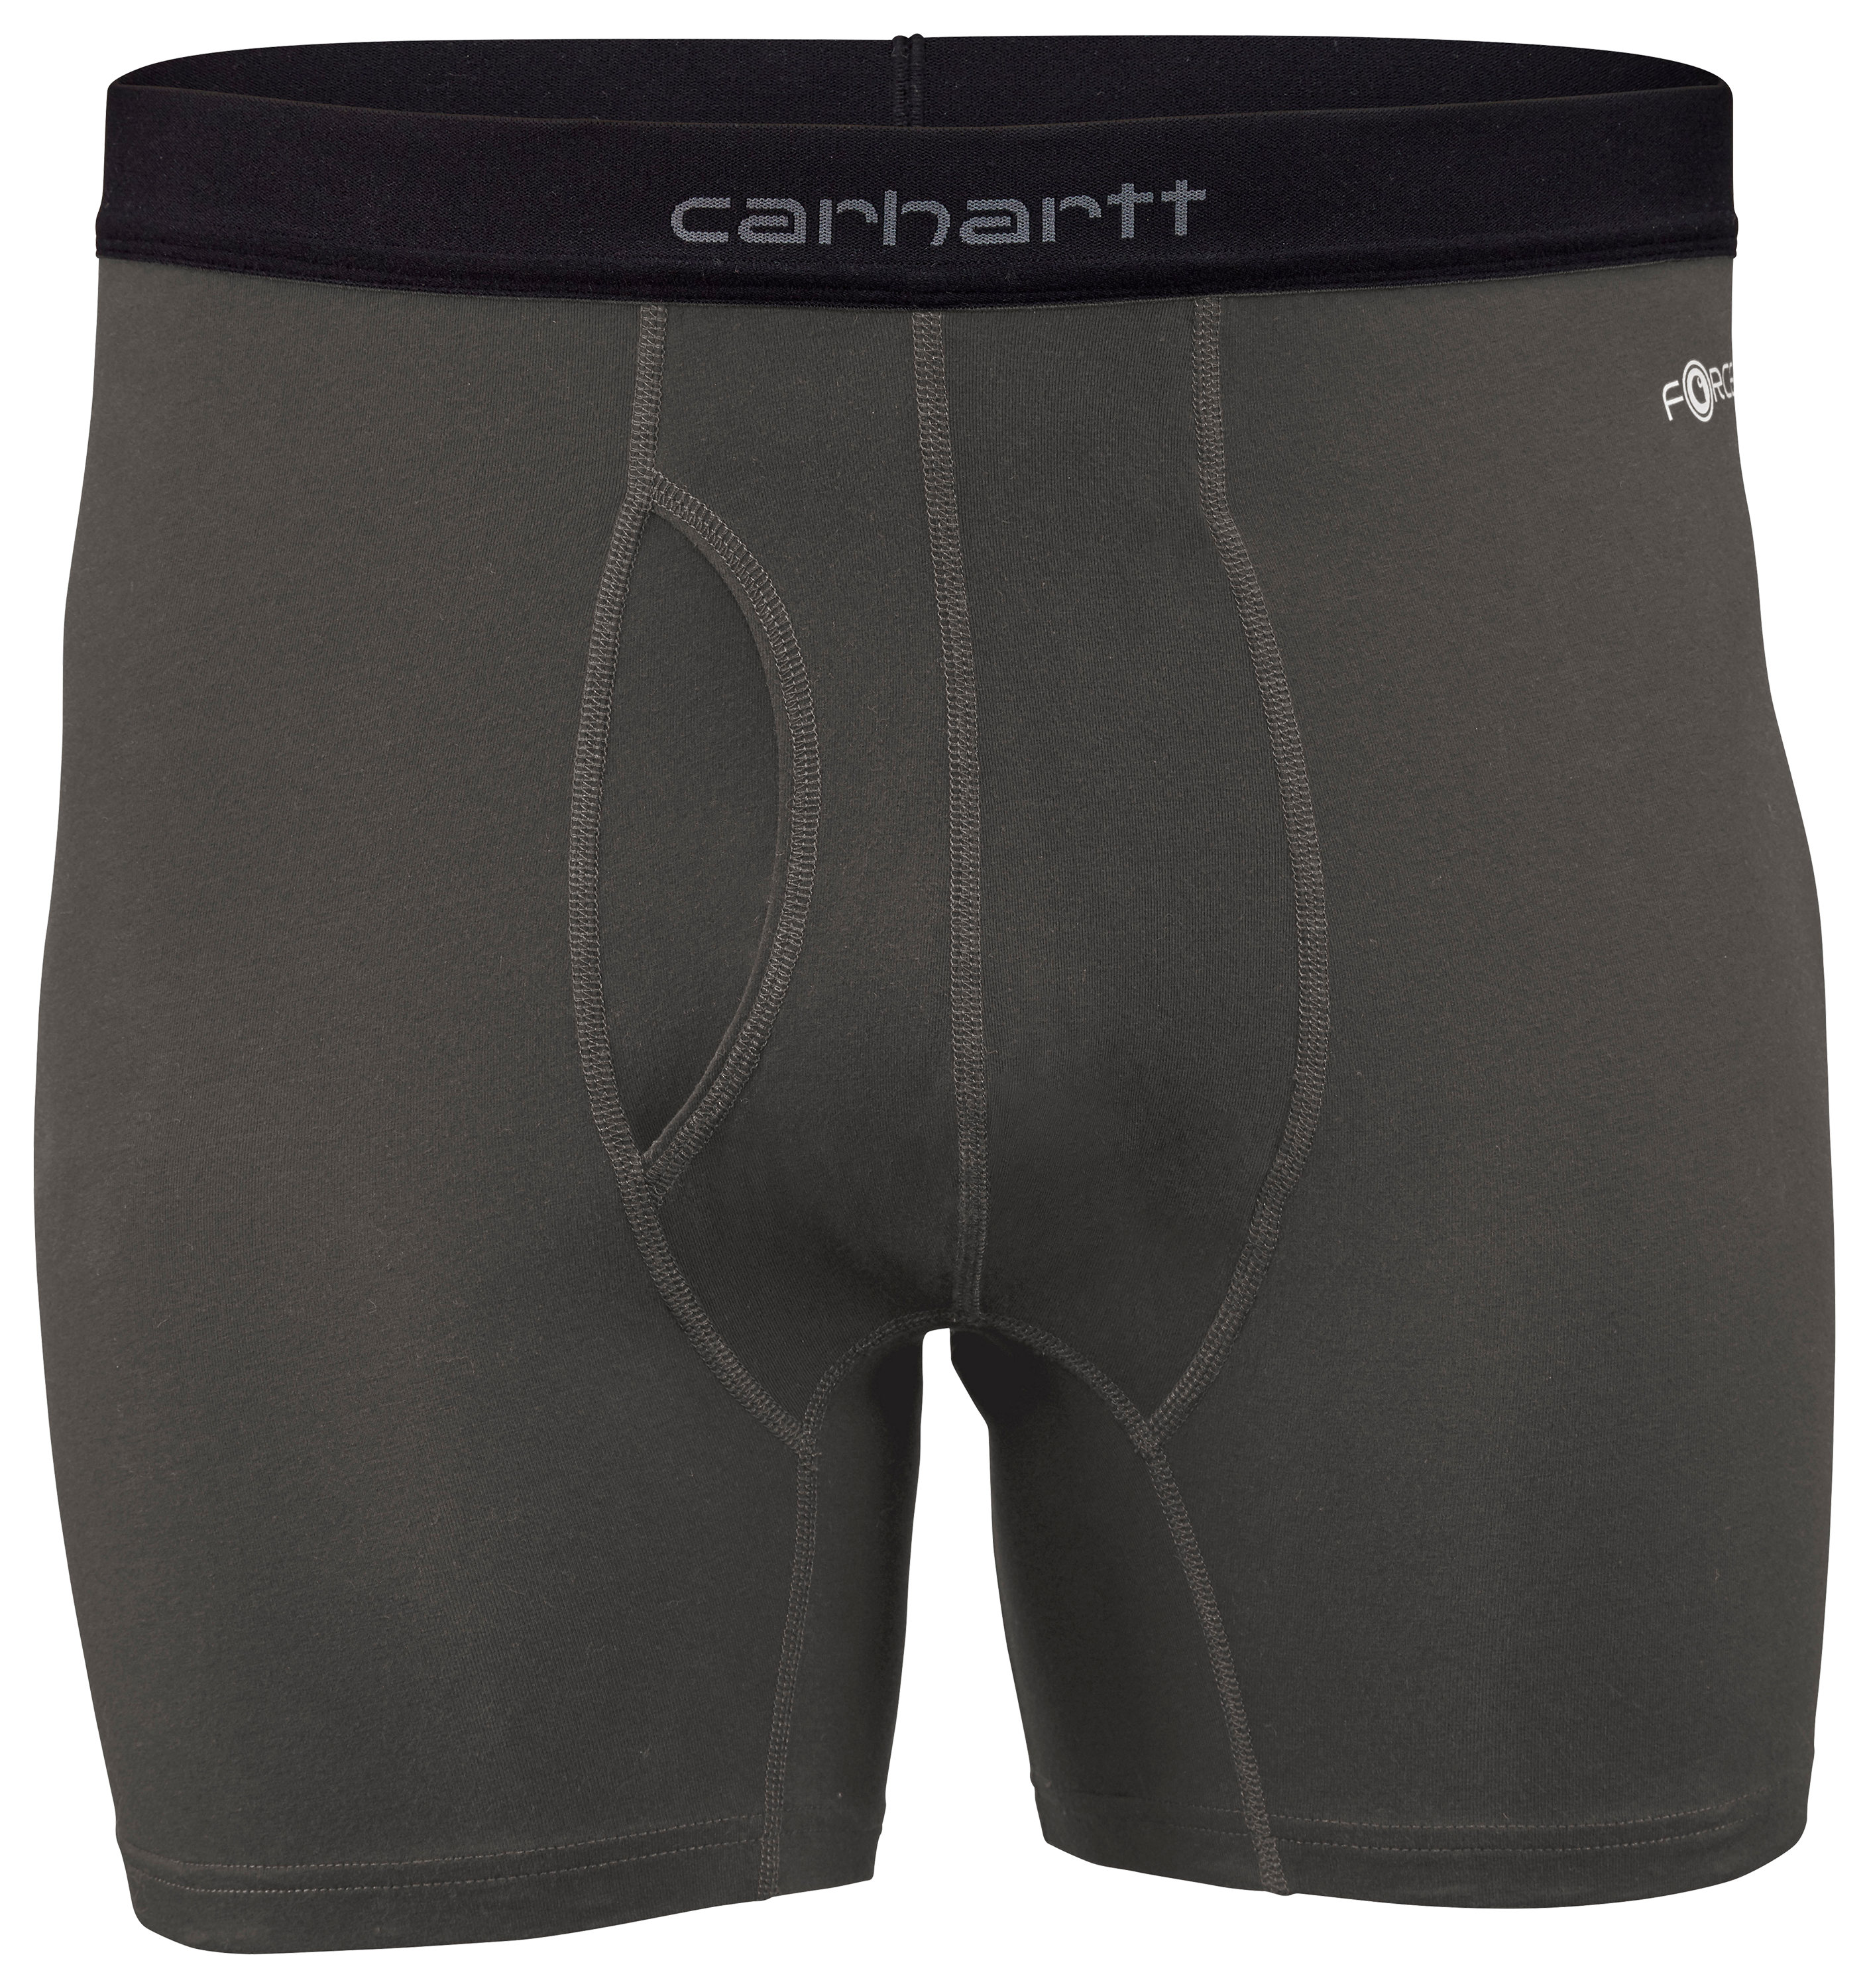 Stance Seeded Boxer Brief in Black